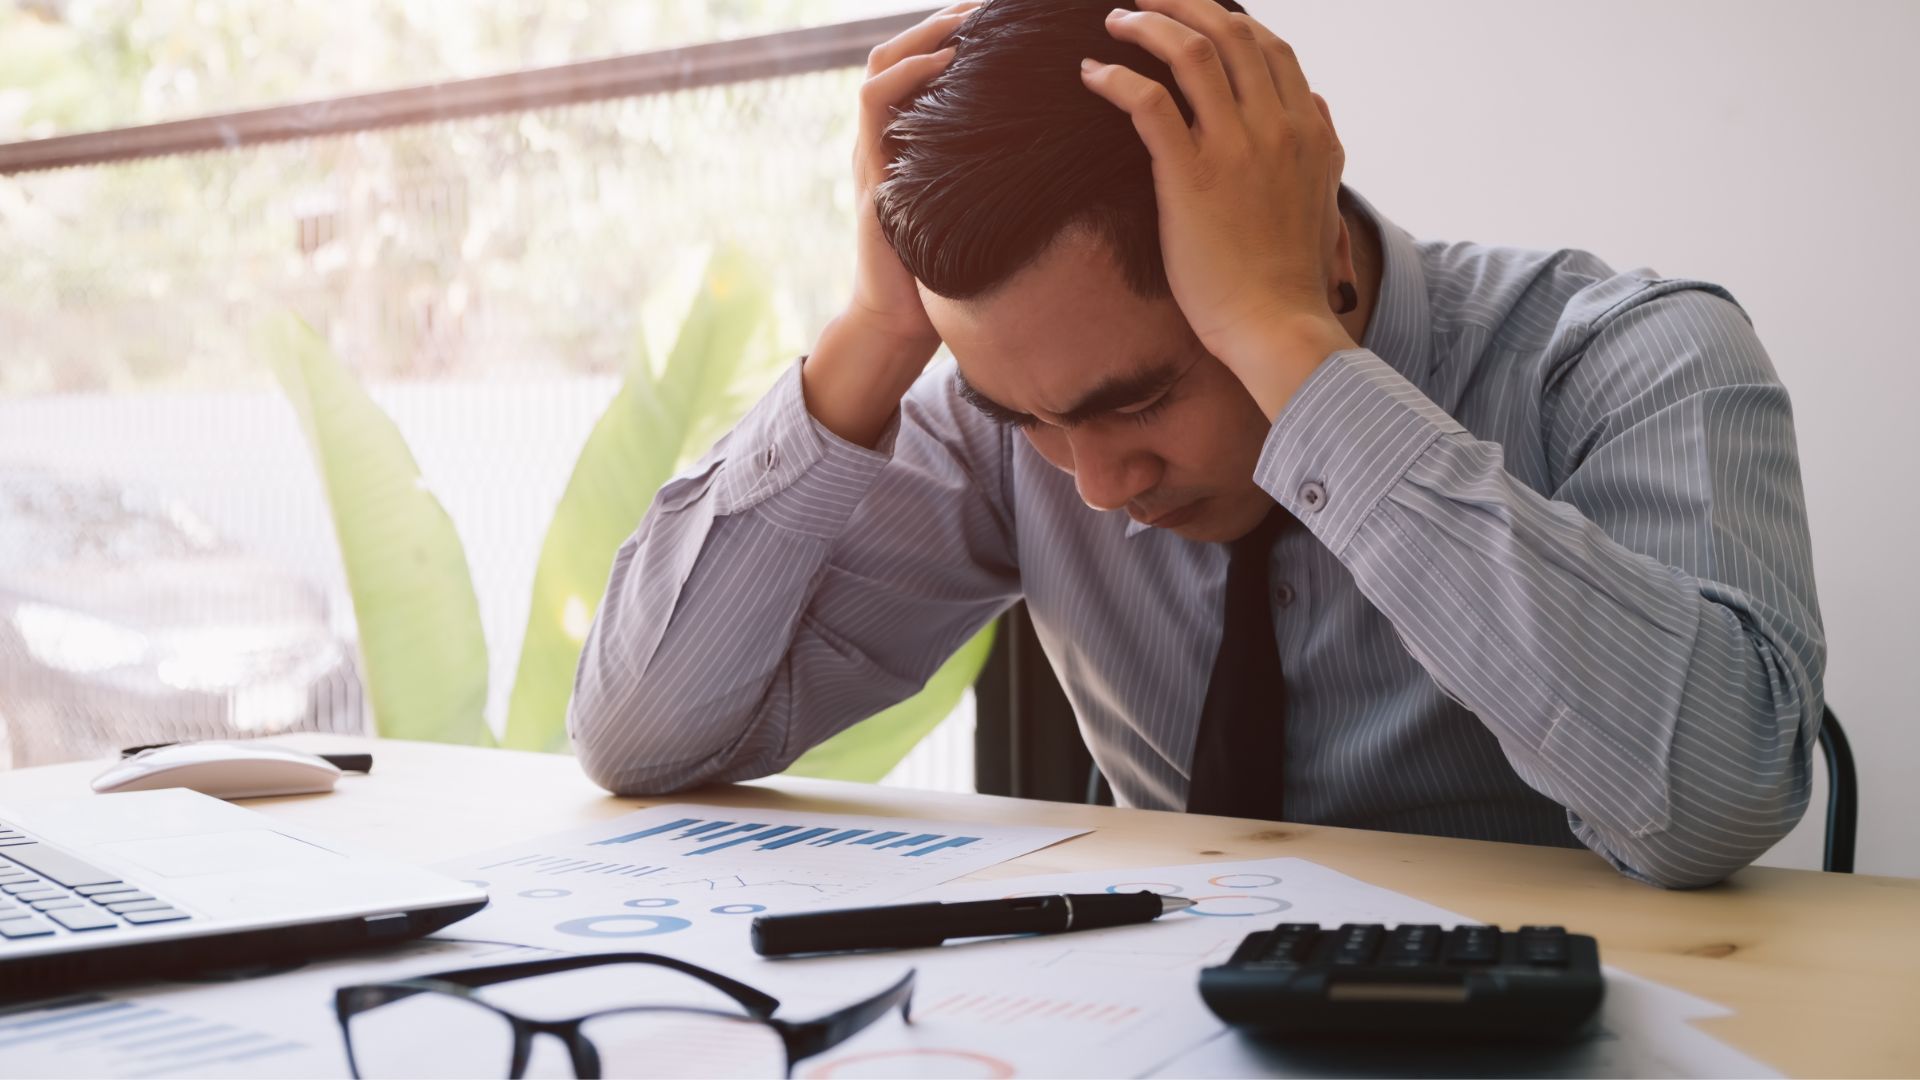 Over Half of Employees Experience Financial Stress. How Can Employers Help?